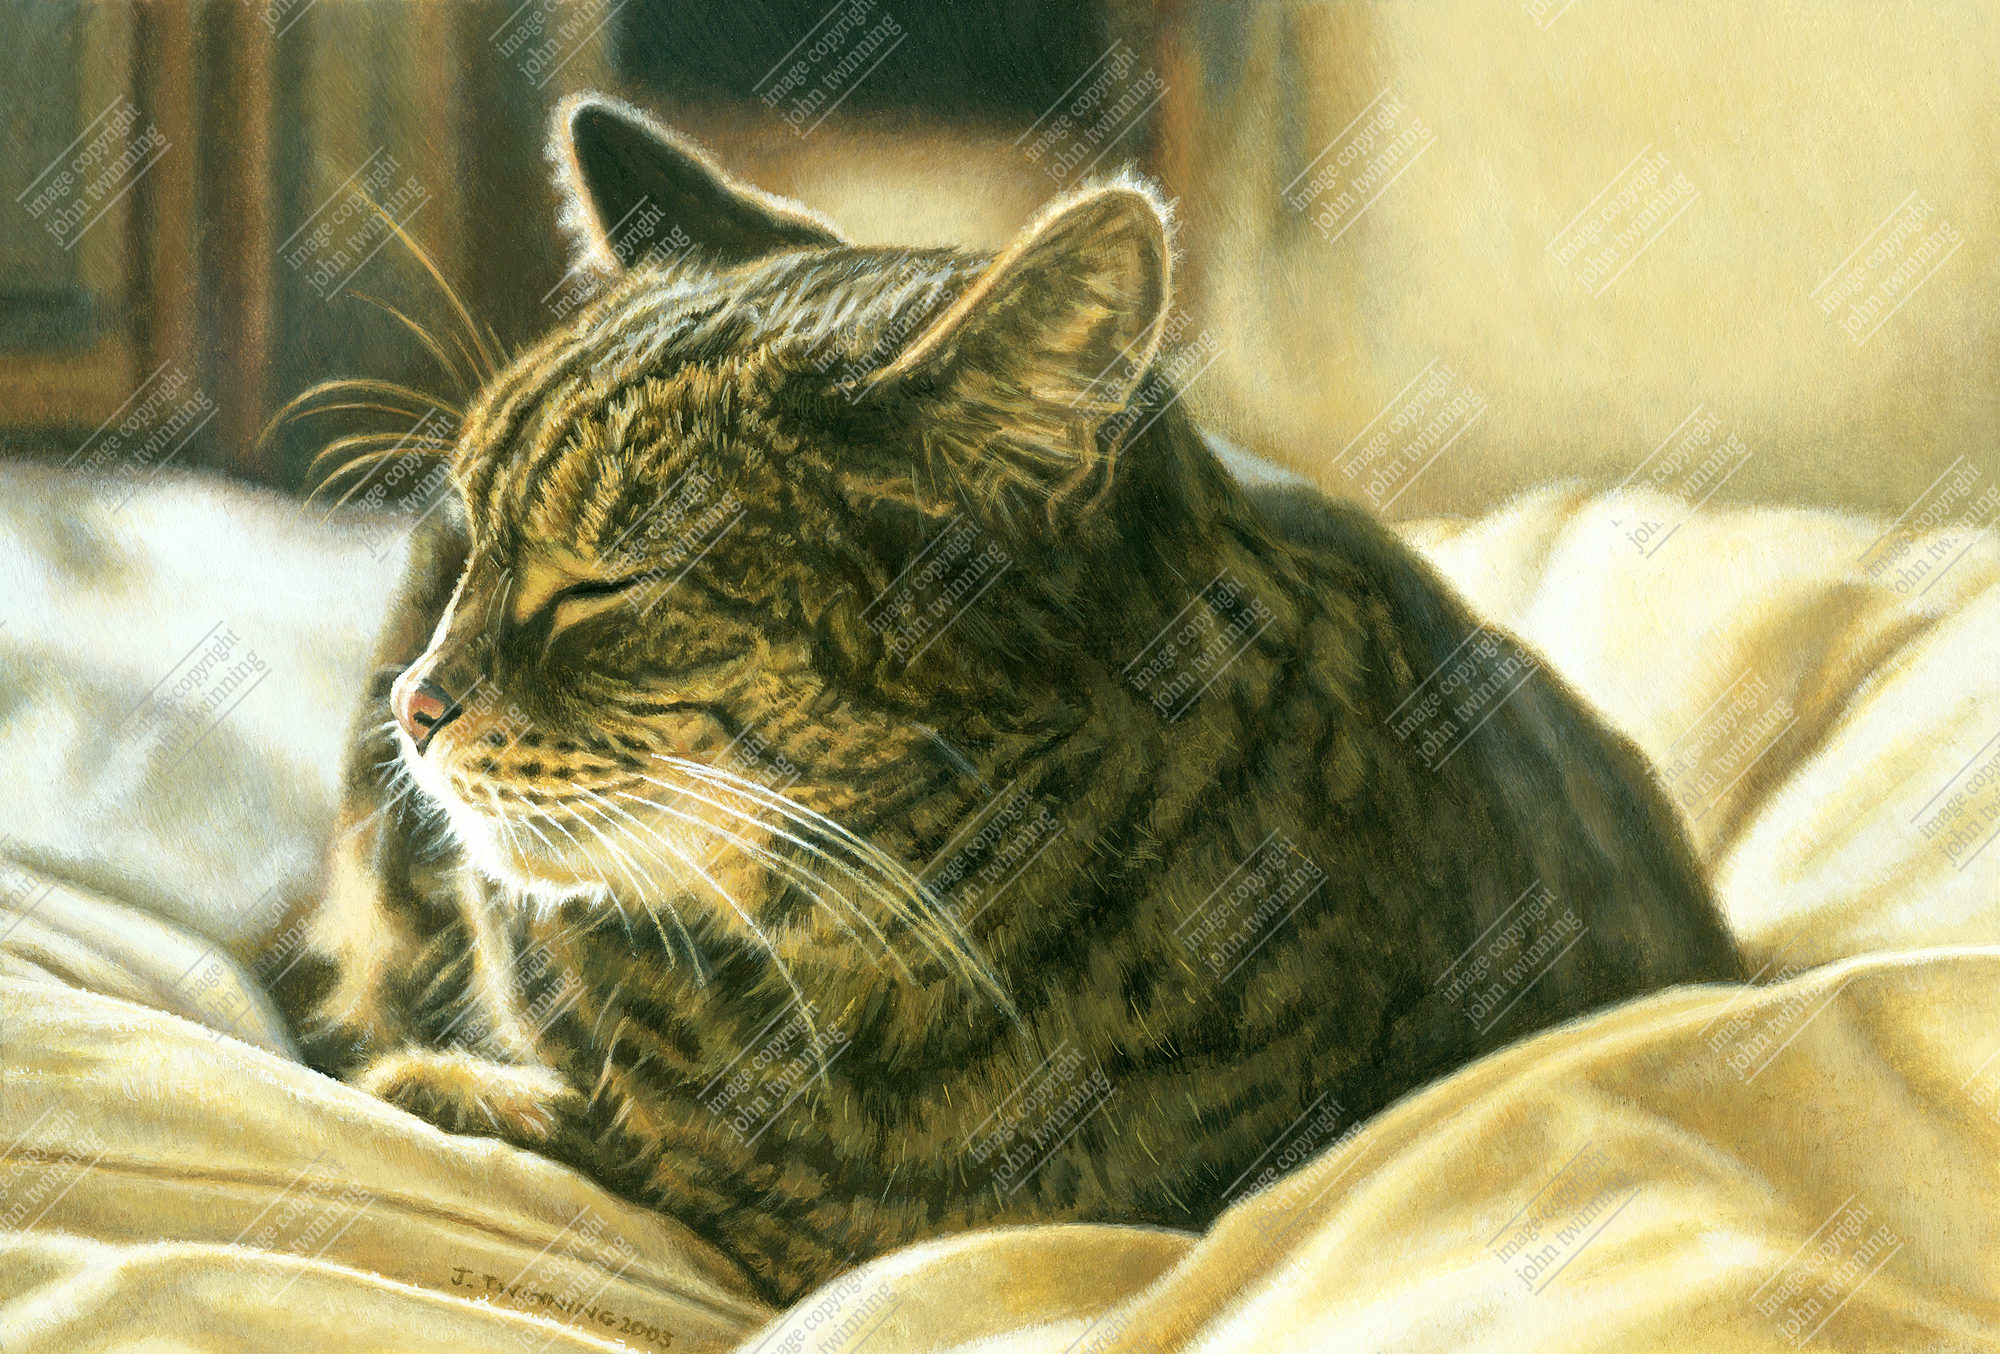 'Tabatha Study II' - art print from a pet portrait painting of a tabby cat